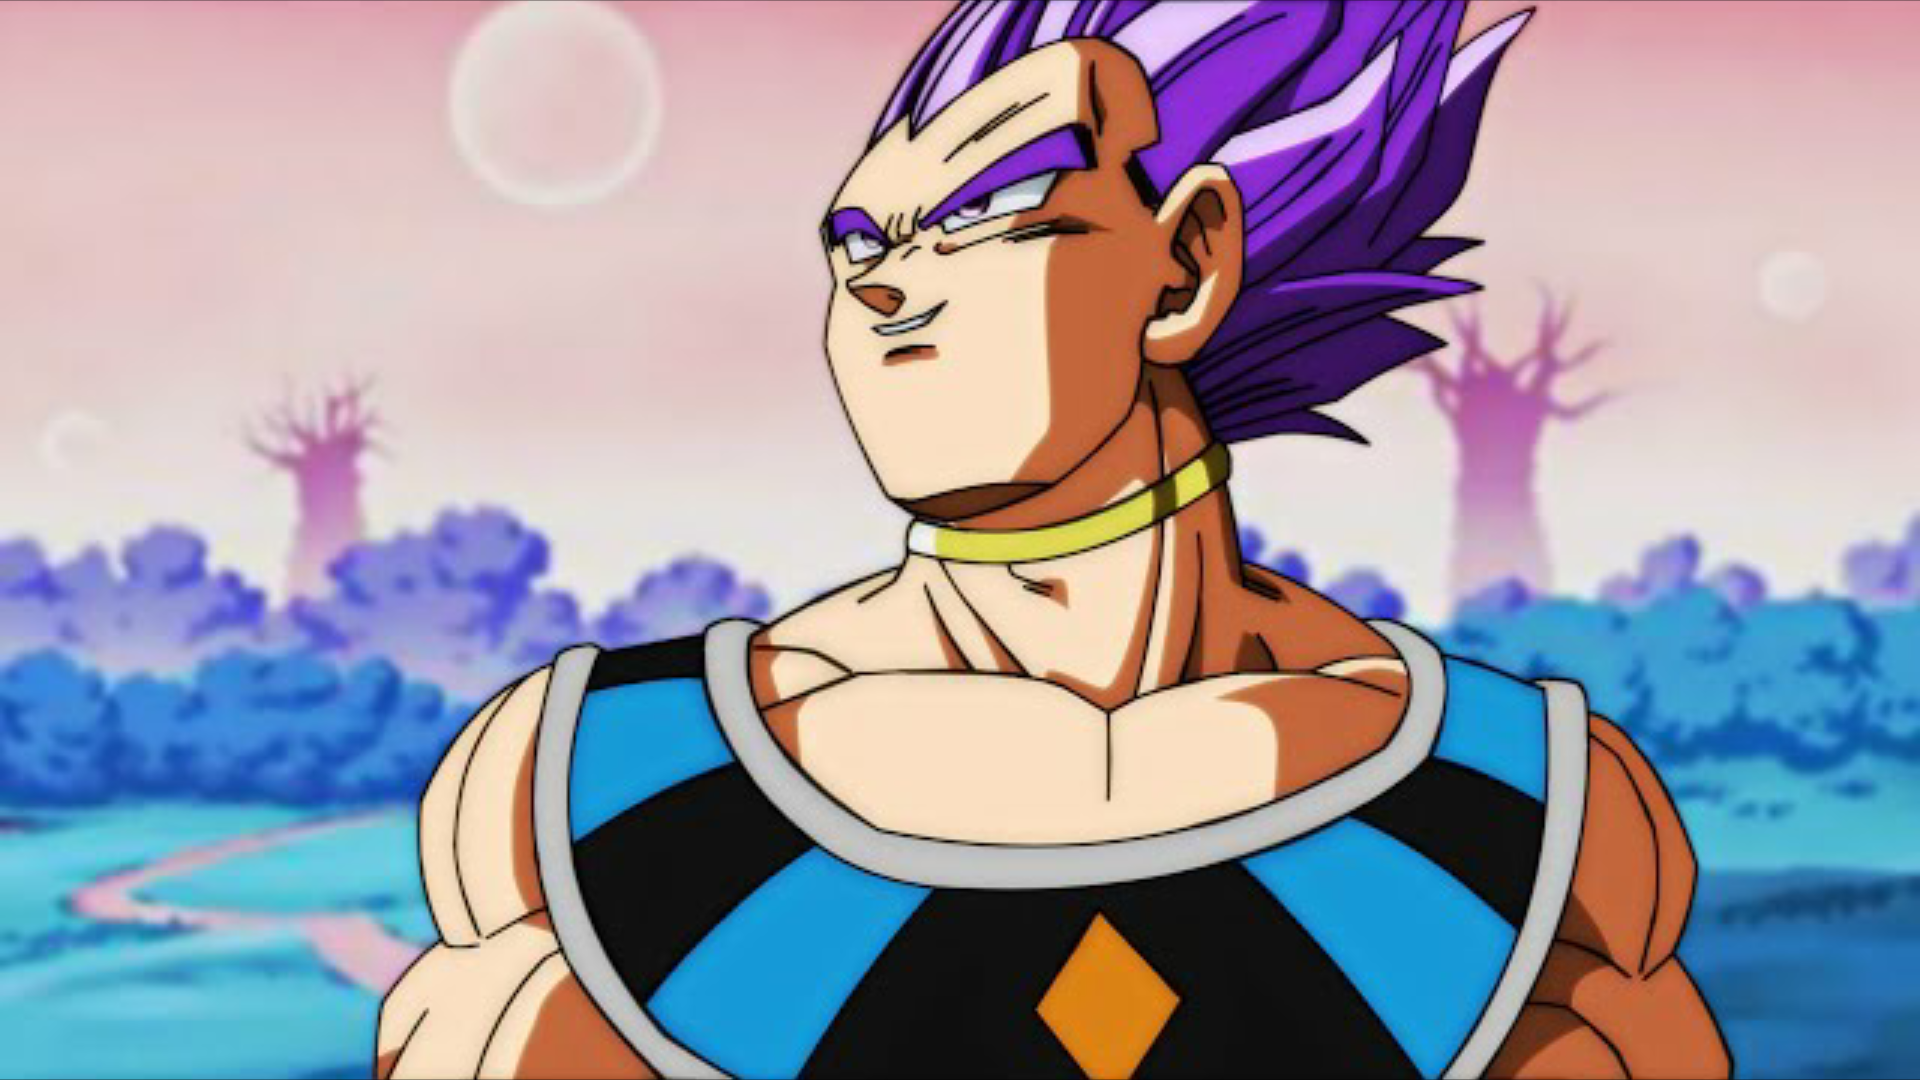 Do you think Vegeta will acquire a new transformation, something like Hakai Mode?